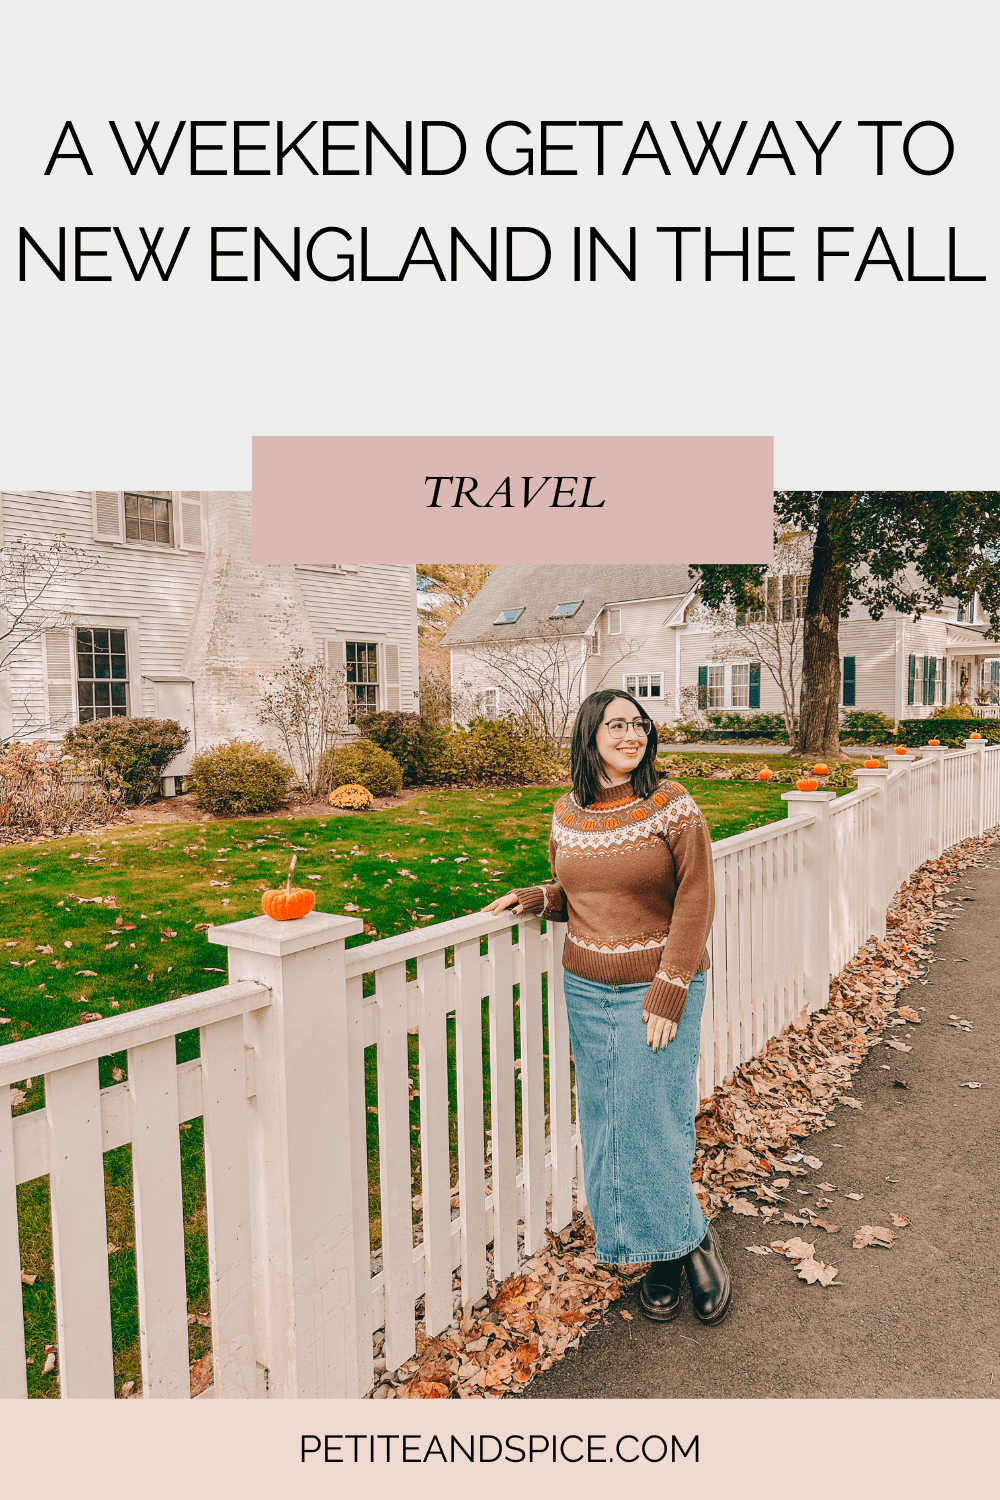 A Weekend Getaway to New England in the Fall